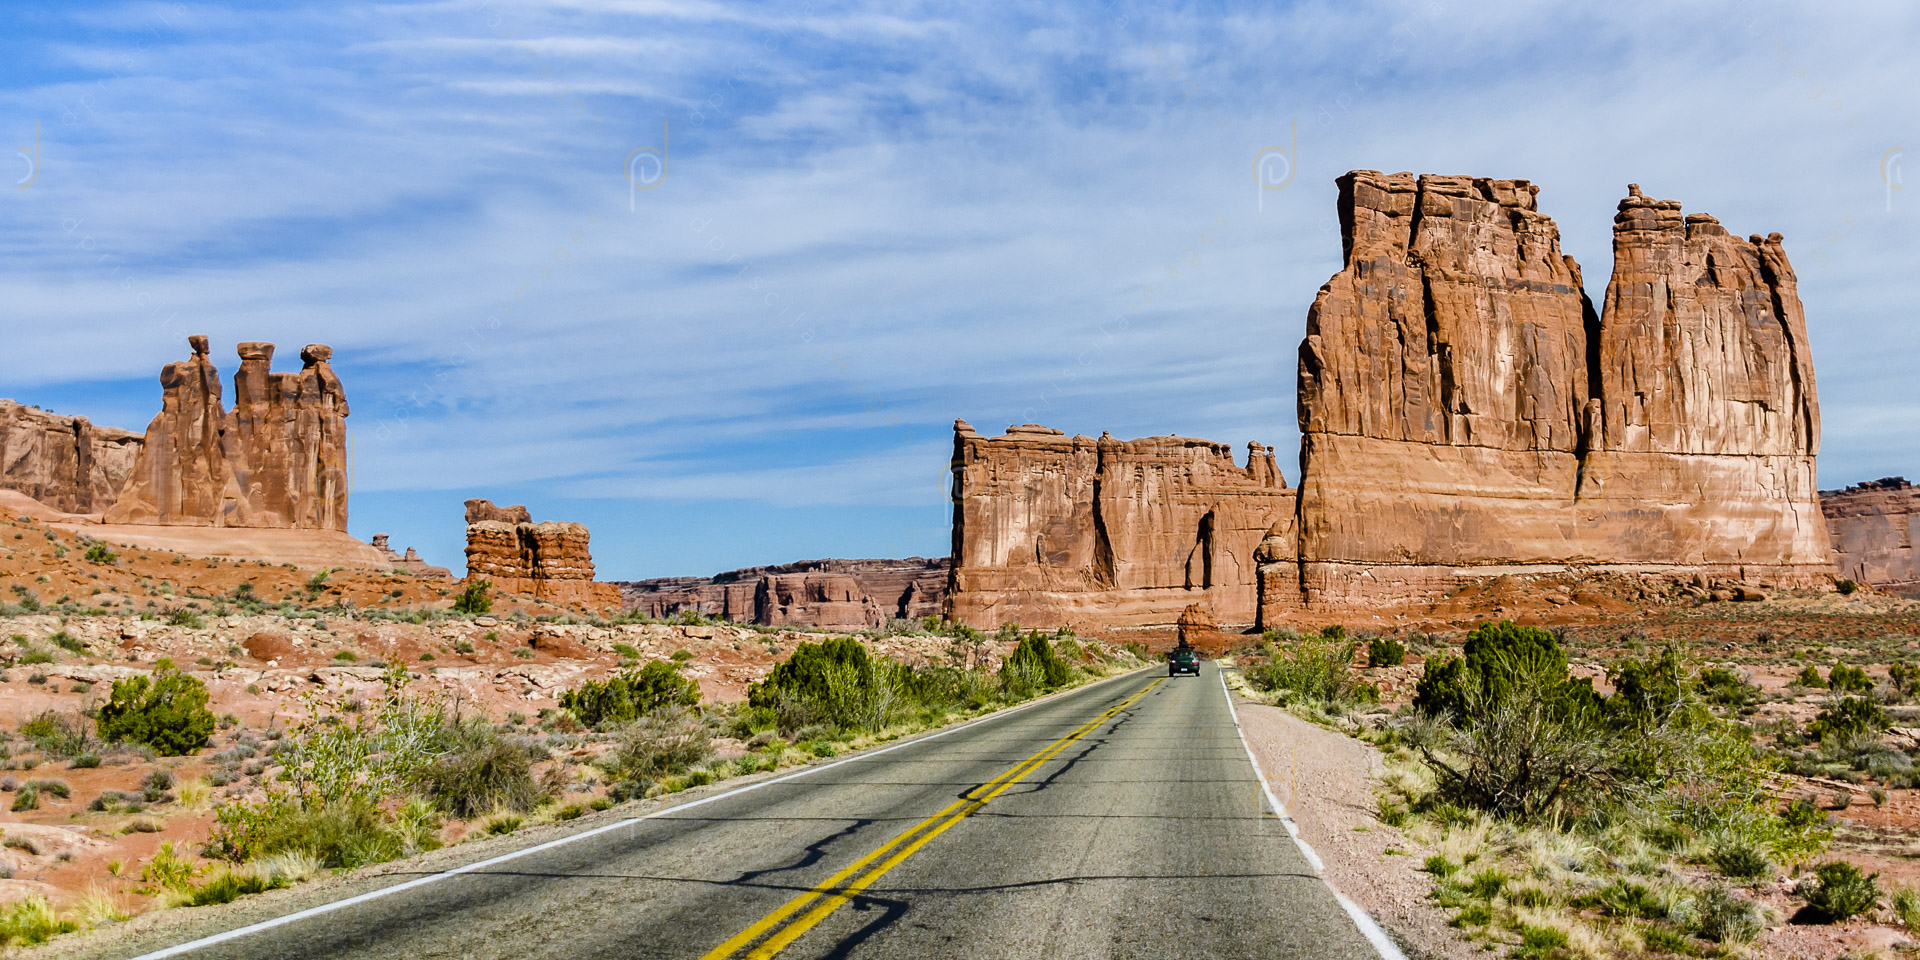 The Organ and Tower of Babel - Arches National Park